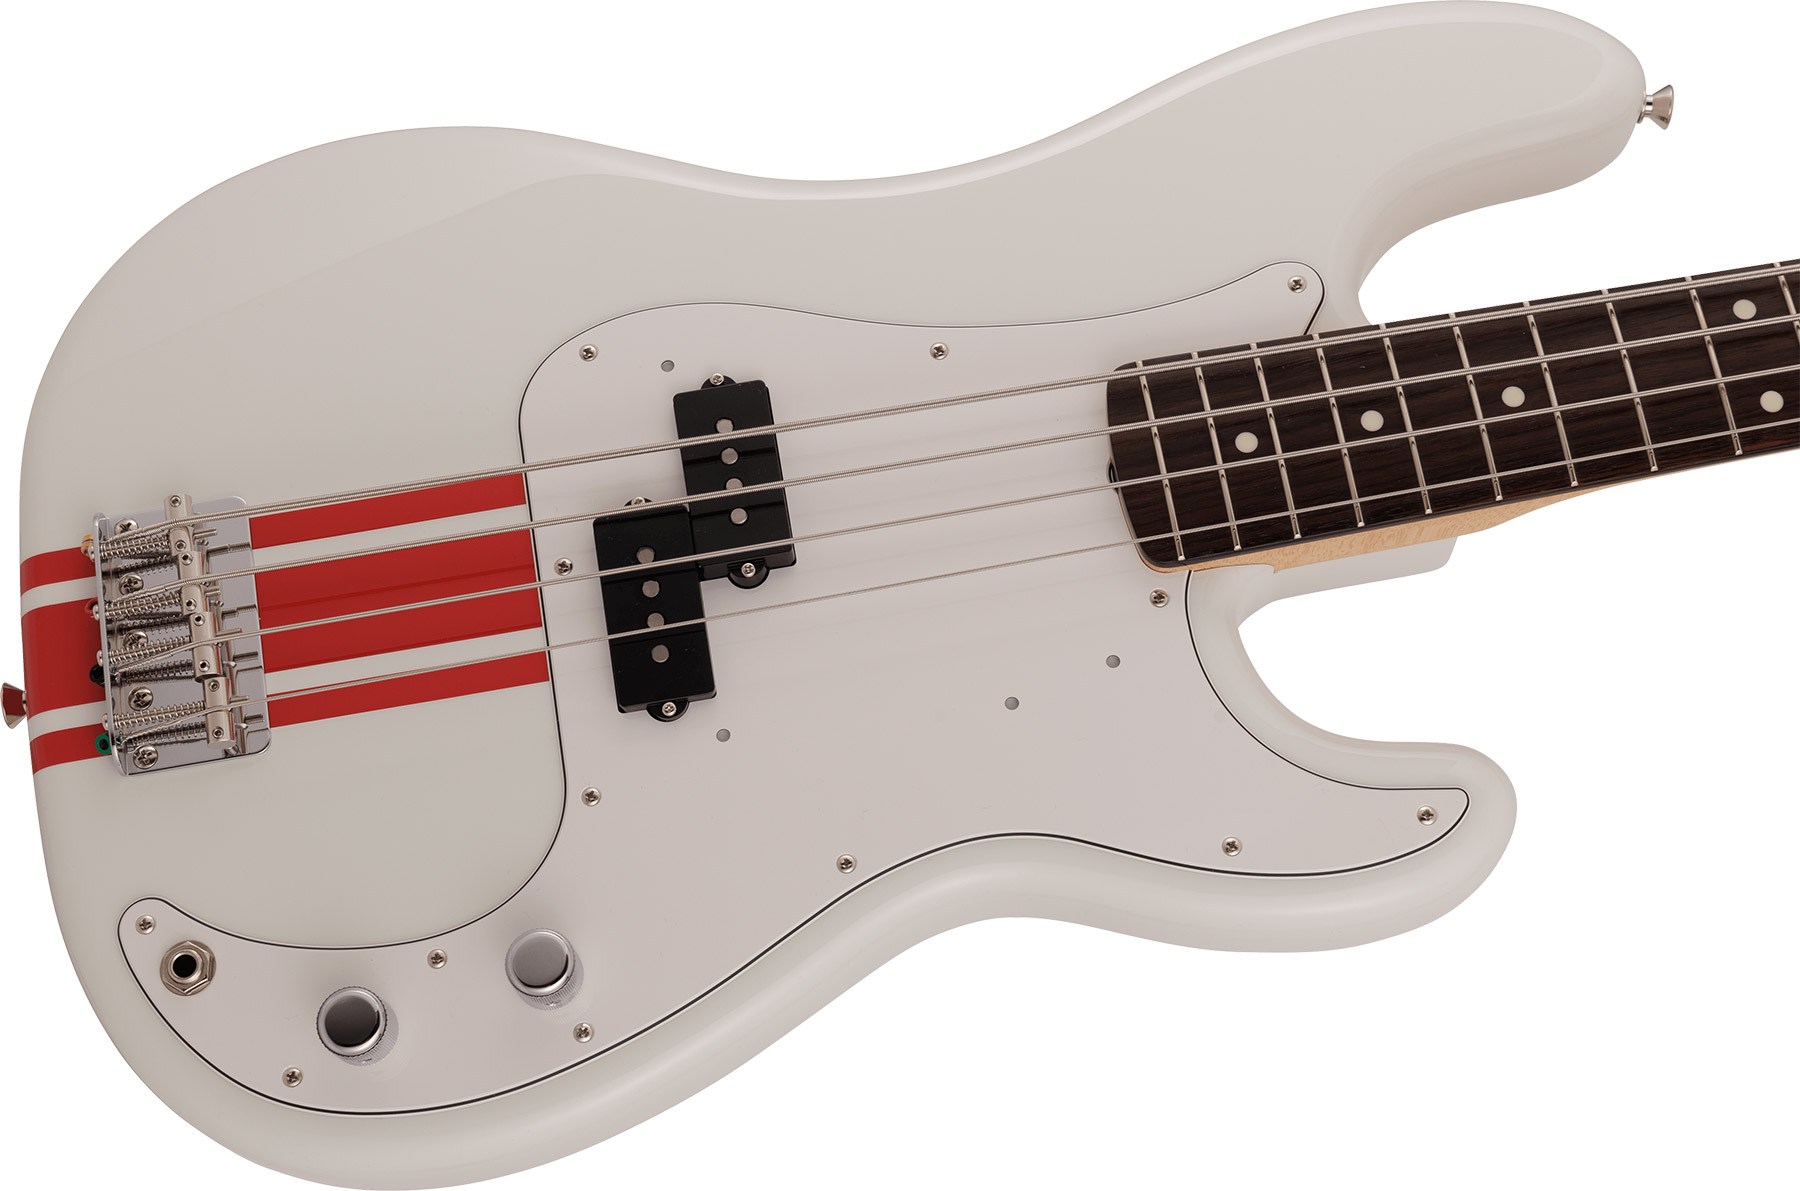 Fender Precision Bass Traditional 60s Mij Jap Rw - Olympic White W/ Red Competition Stripe - Solidbody E-bass - Variation 2